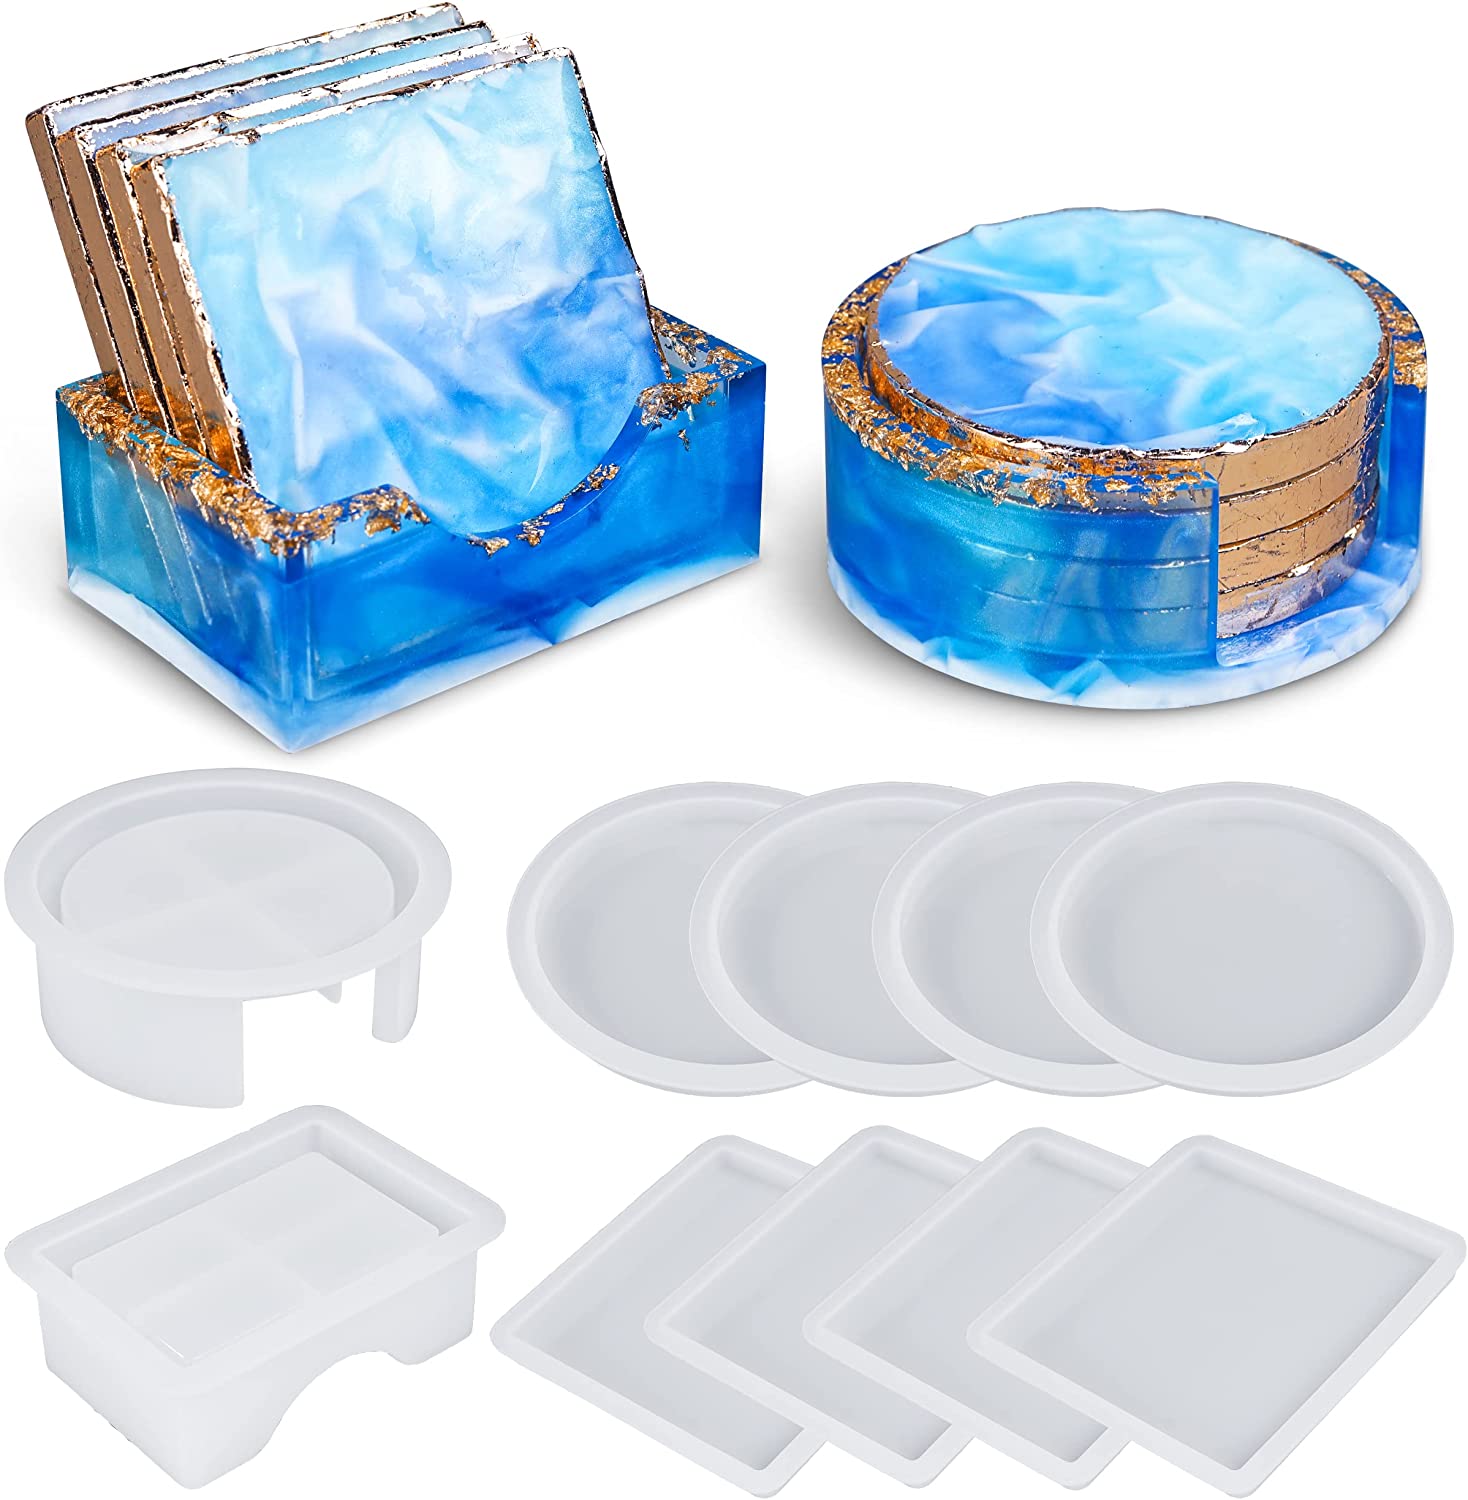 10pcs Resin Coaster Molds Kit with Square and Round Shapes